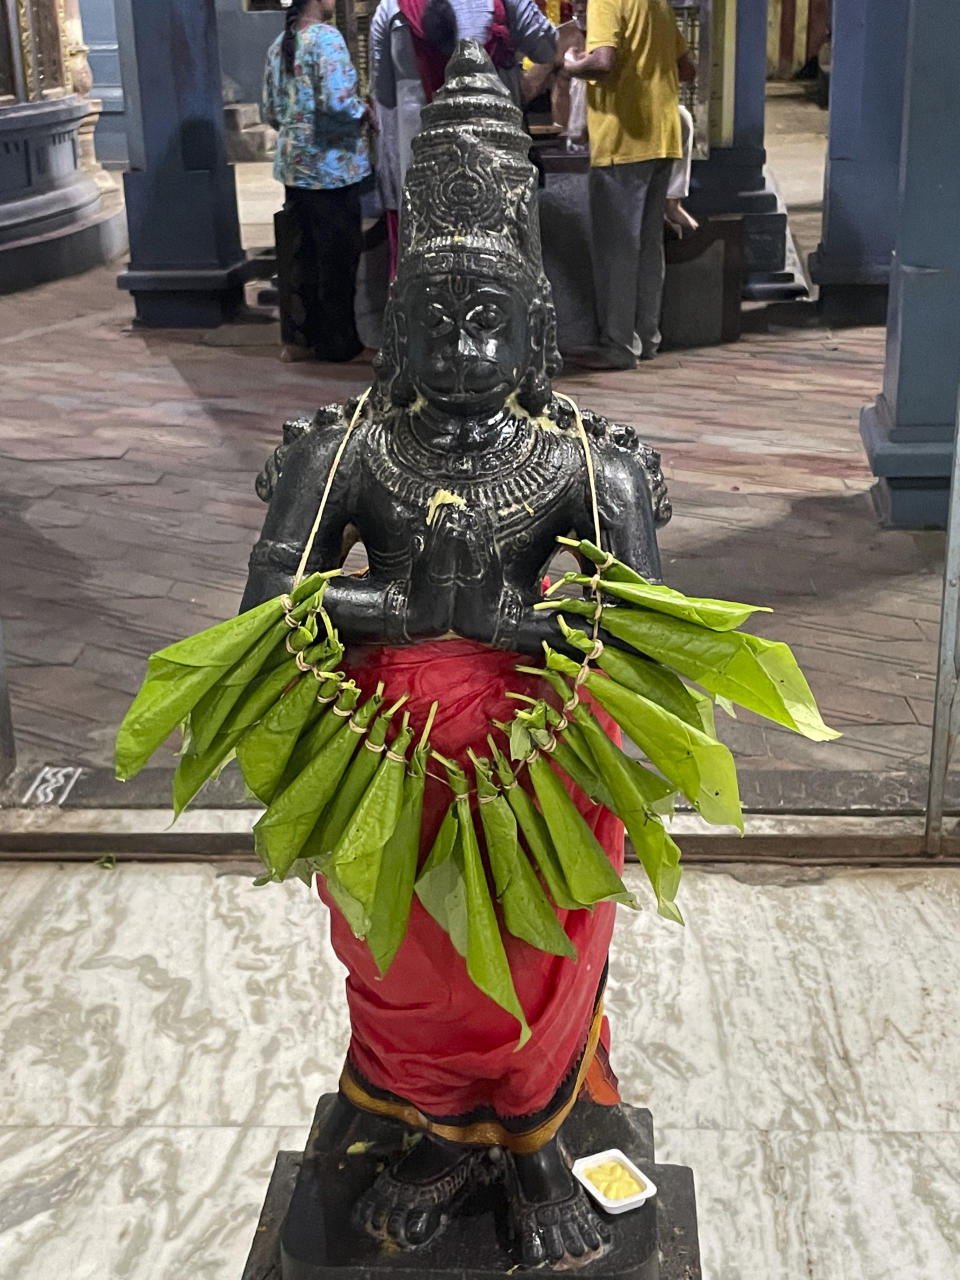 Devotees offer betel leaf garlands to the deity known as Hanuman or Anjaneya at the Sri Lakshmi Narasimha Navaneetha Krishnan Temple in Chennai, India, on Nov. 28, 2022. The deity is popular among U.S. visa seekers as "America Anjaneya" or "Visa Anjaneya" because they believe praying to him will make the process successful and hassle-free. (AP Photo/Deepa Bharath)